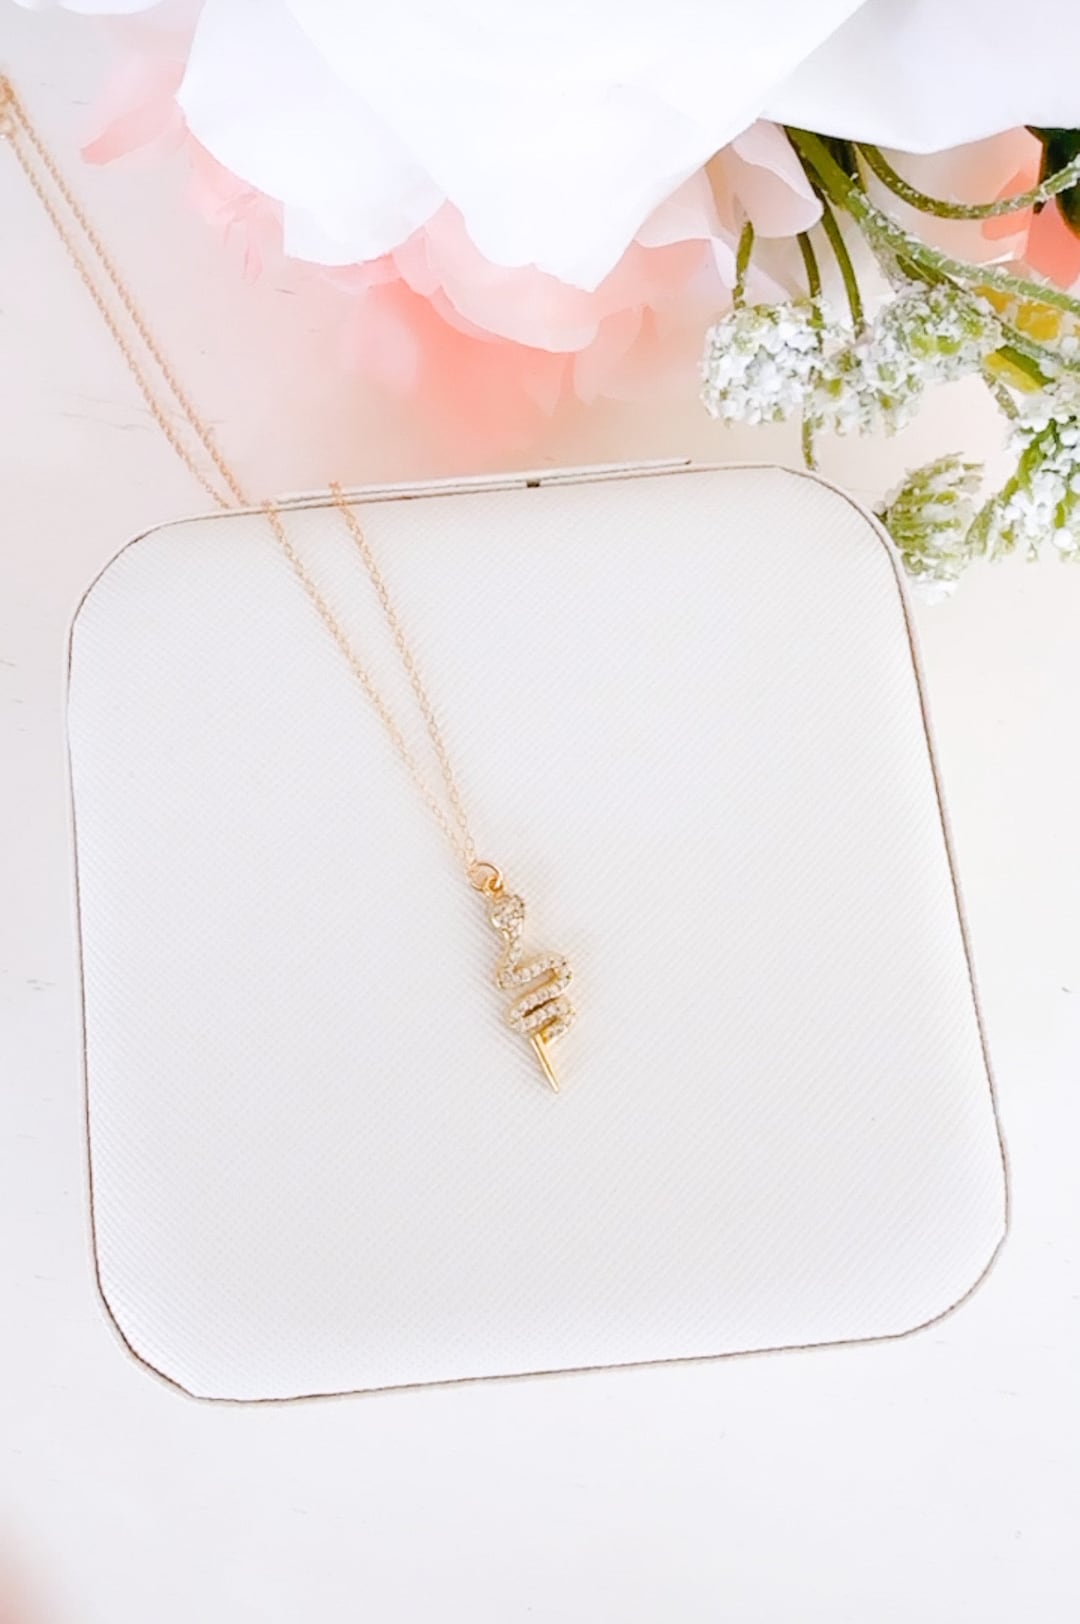 TS Fans Gifts:1989 Taylors Version,Taylor Swift Necklace, Taylor Swift Necklace Alloy Necklace with Snake and Number 13 inch, Taylor Swift Merch for